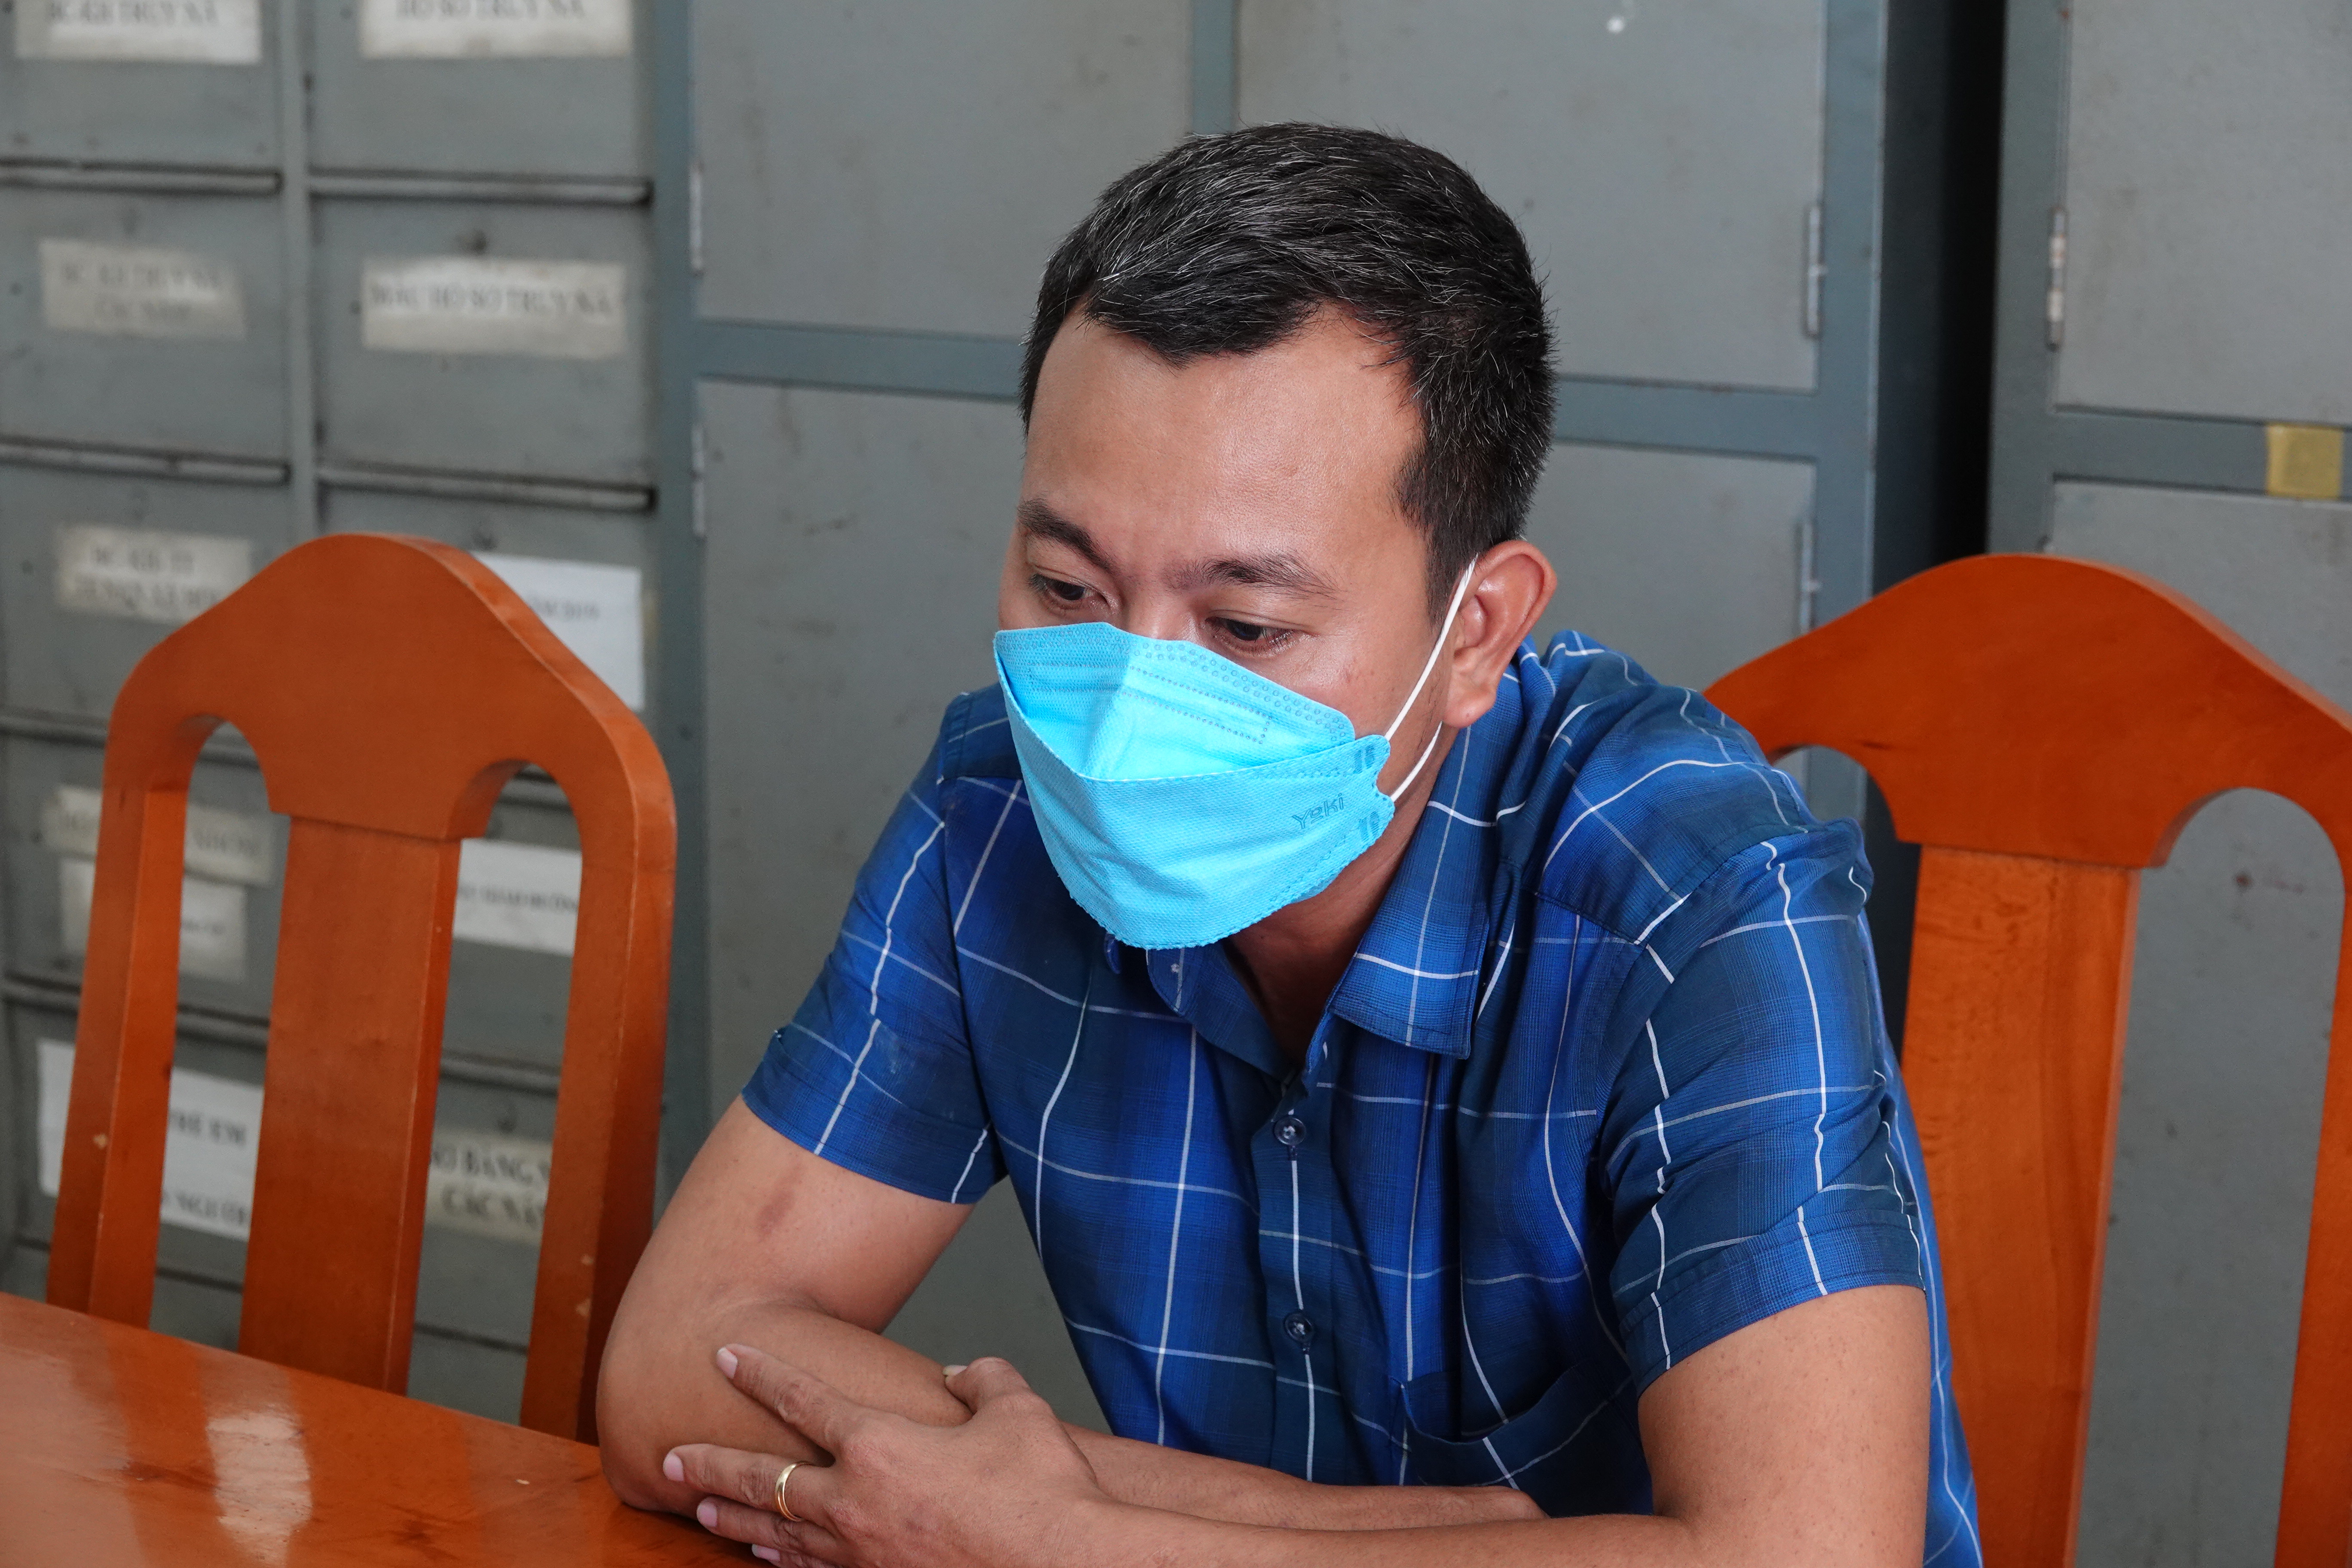 Le Anh Tuan is held at the police station in Binh Thuan Province, Vietnam. Photo: Tuan Tu / Tuoi Tre